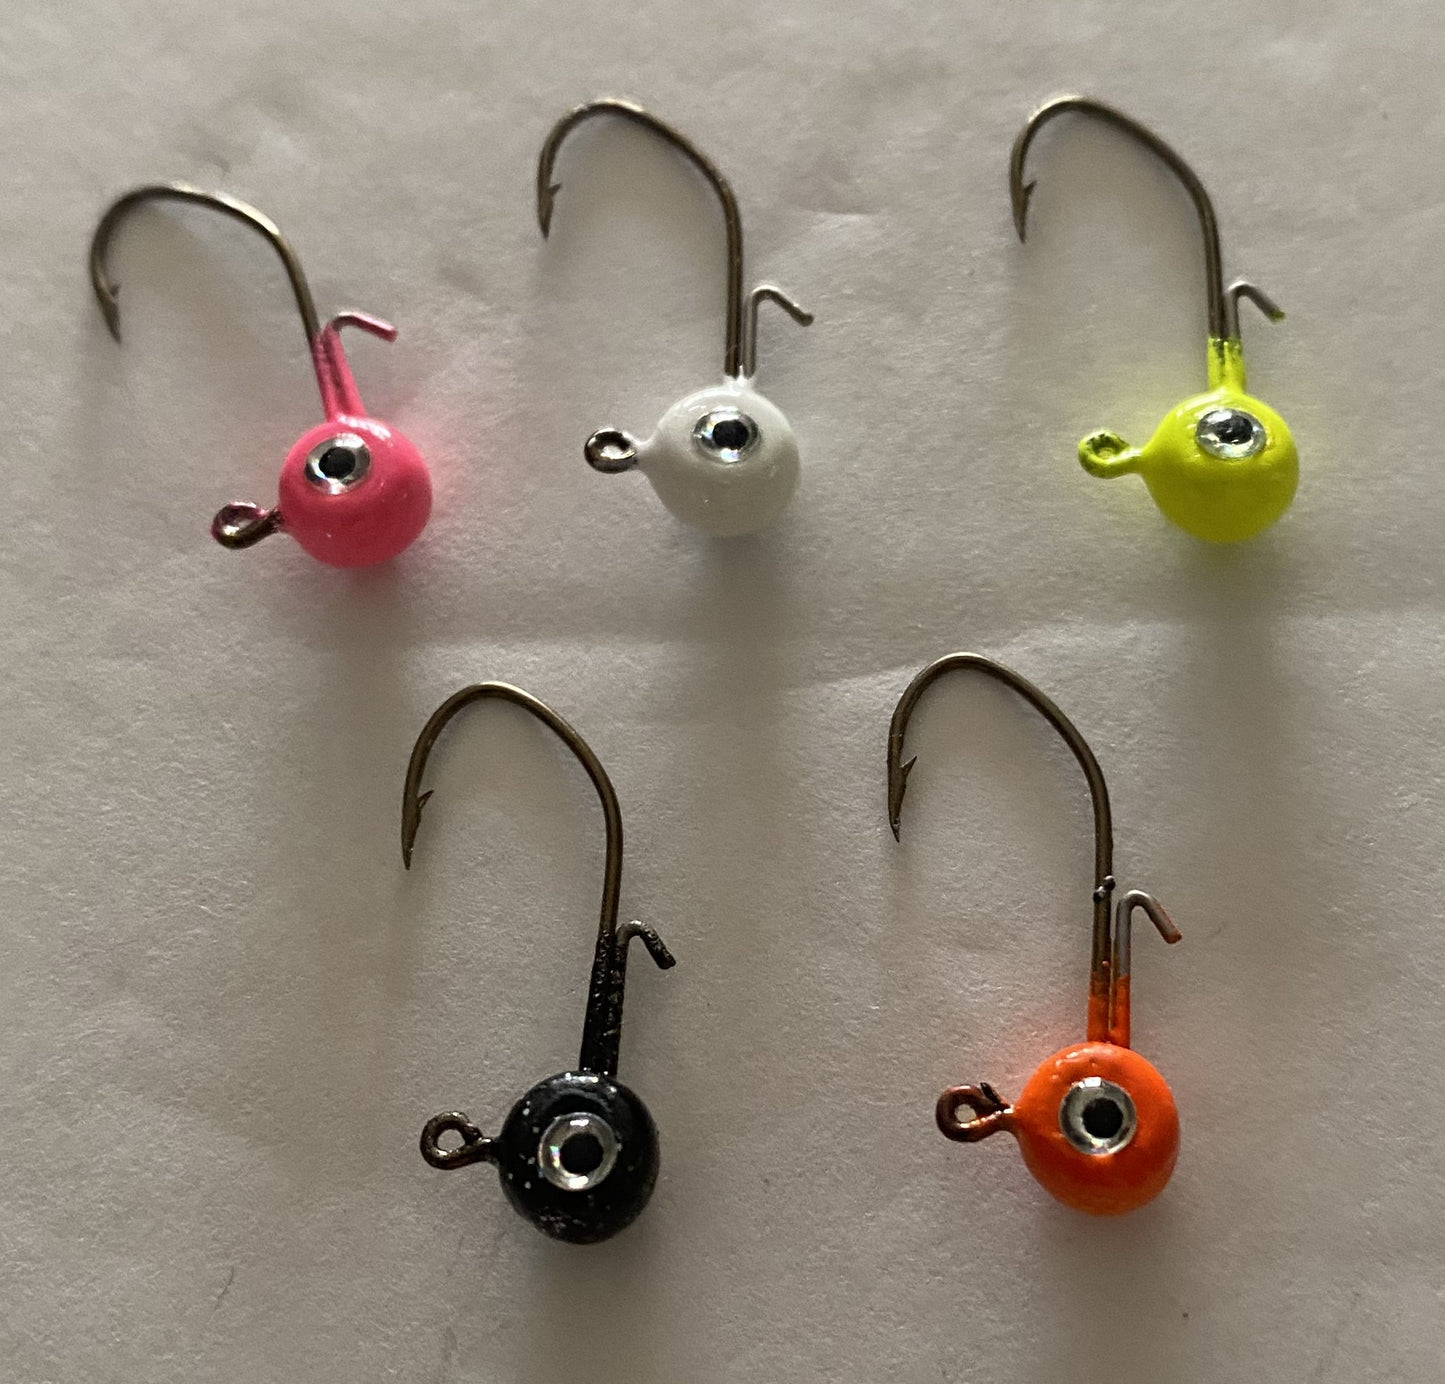 1/24oz freestyle jig heads painted different colors 10 pcs – M & C's  Handcrafted Jigs & Lures